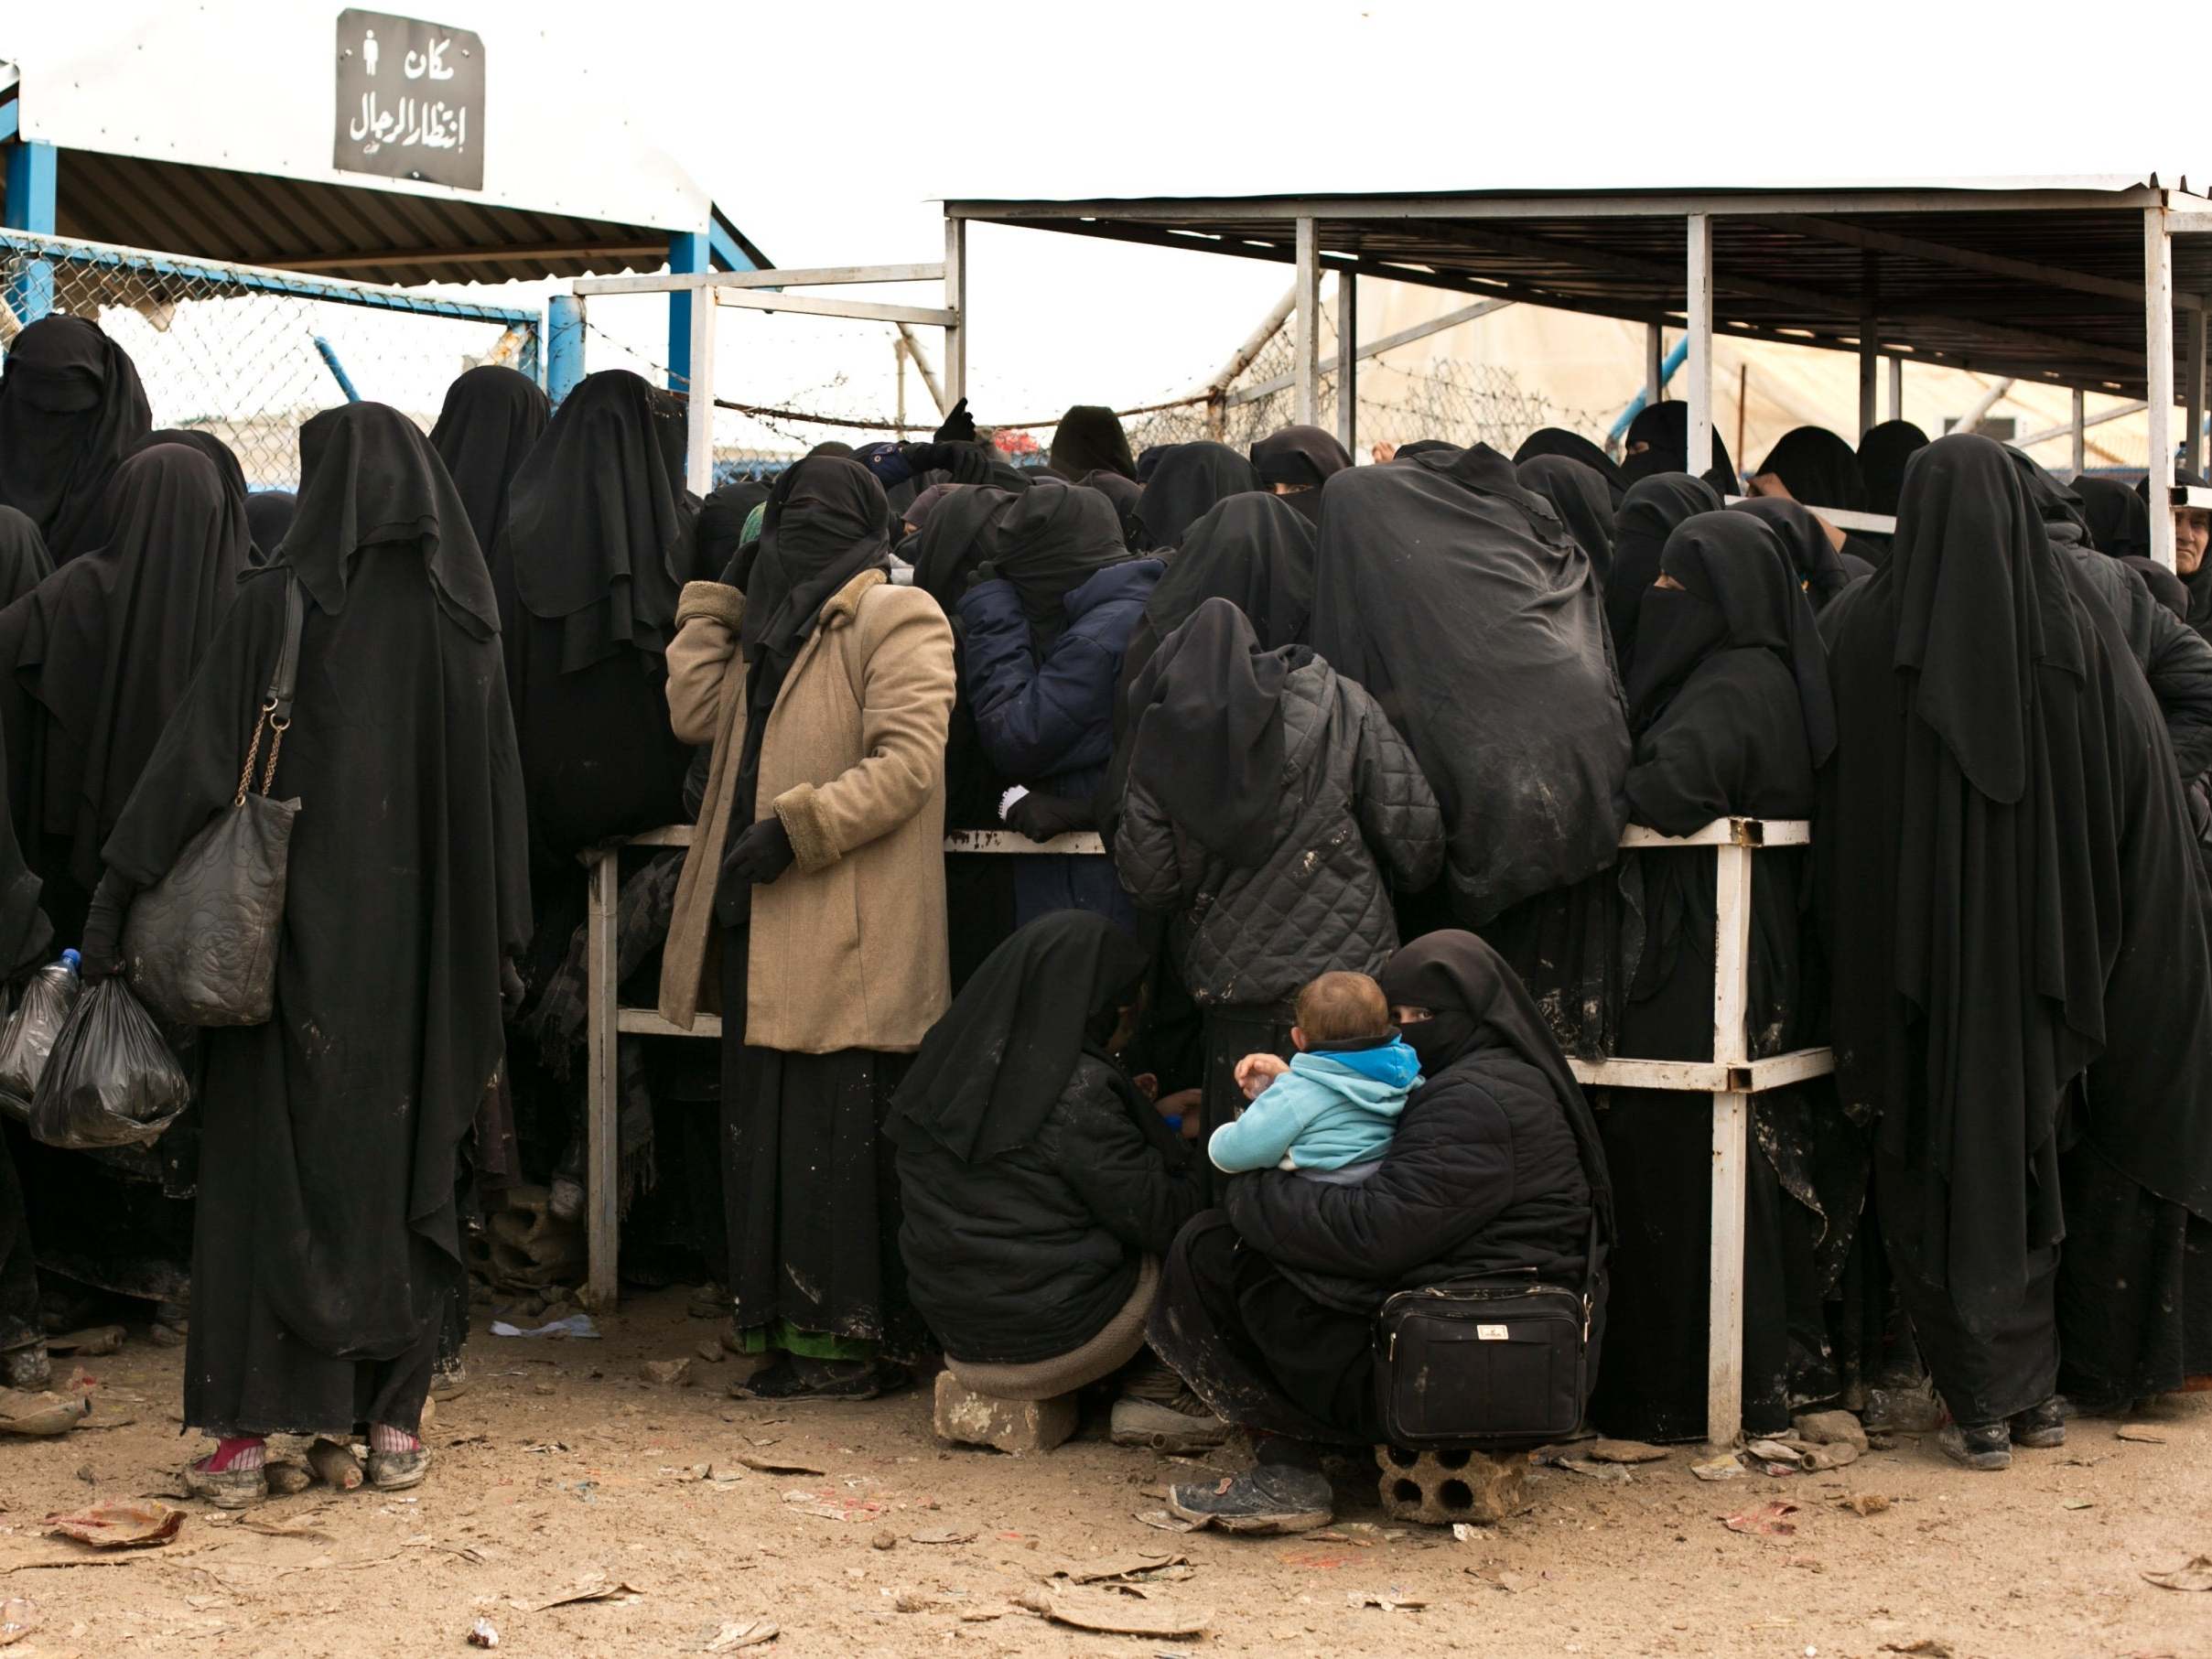 Women wait for aid at al-Hol refugee camp, the largest in Syria